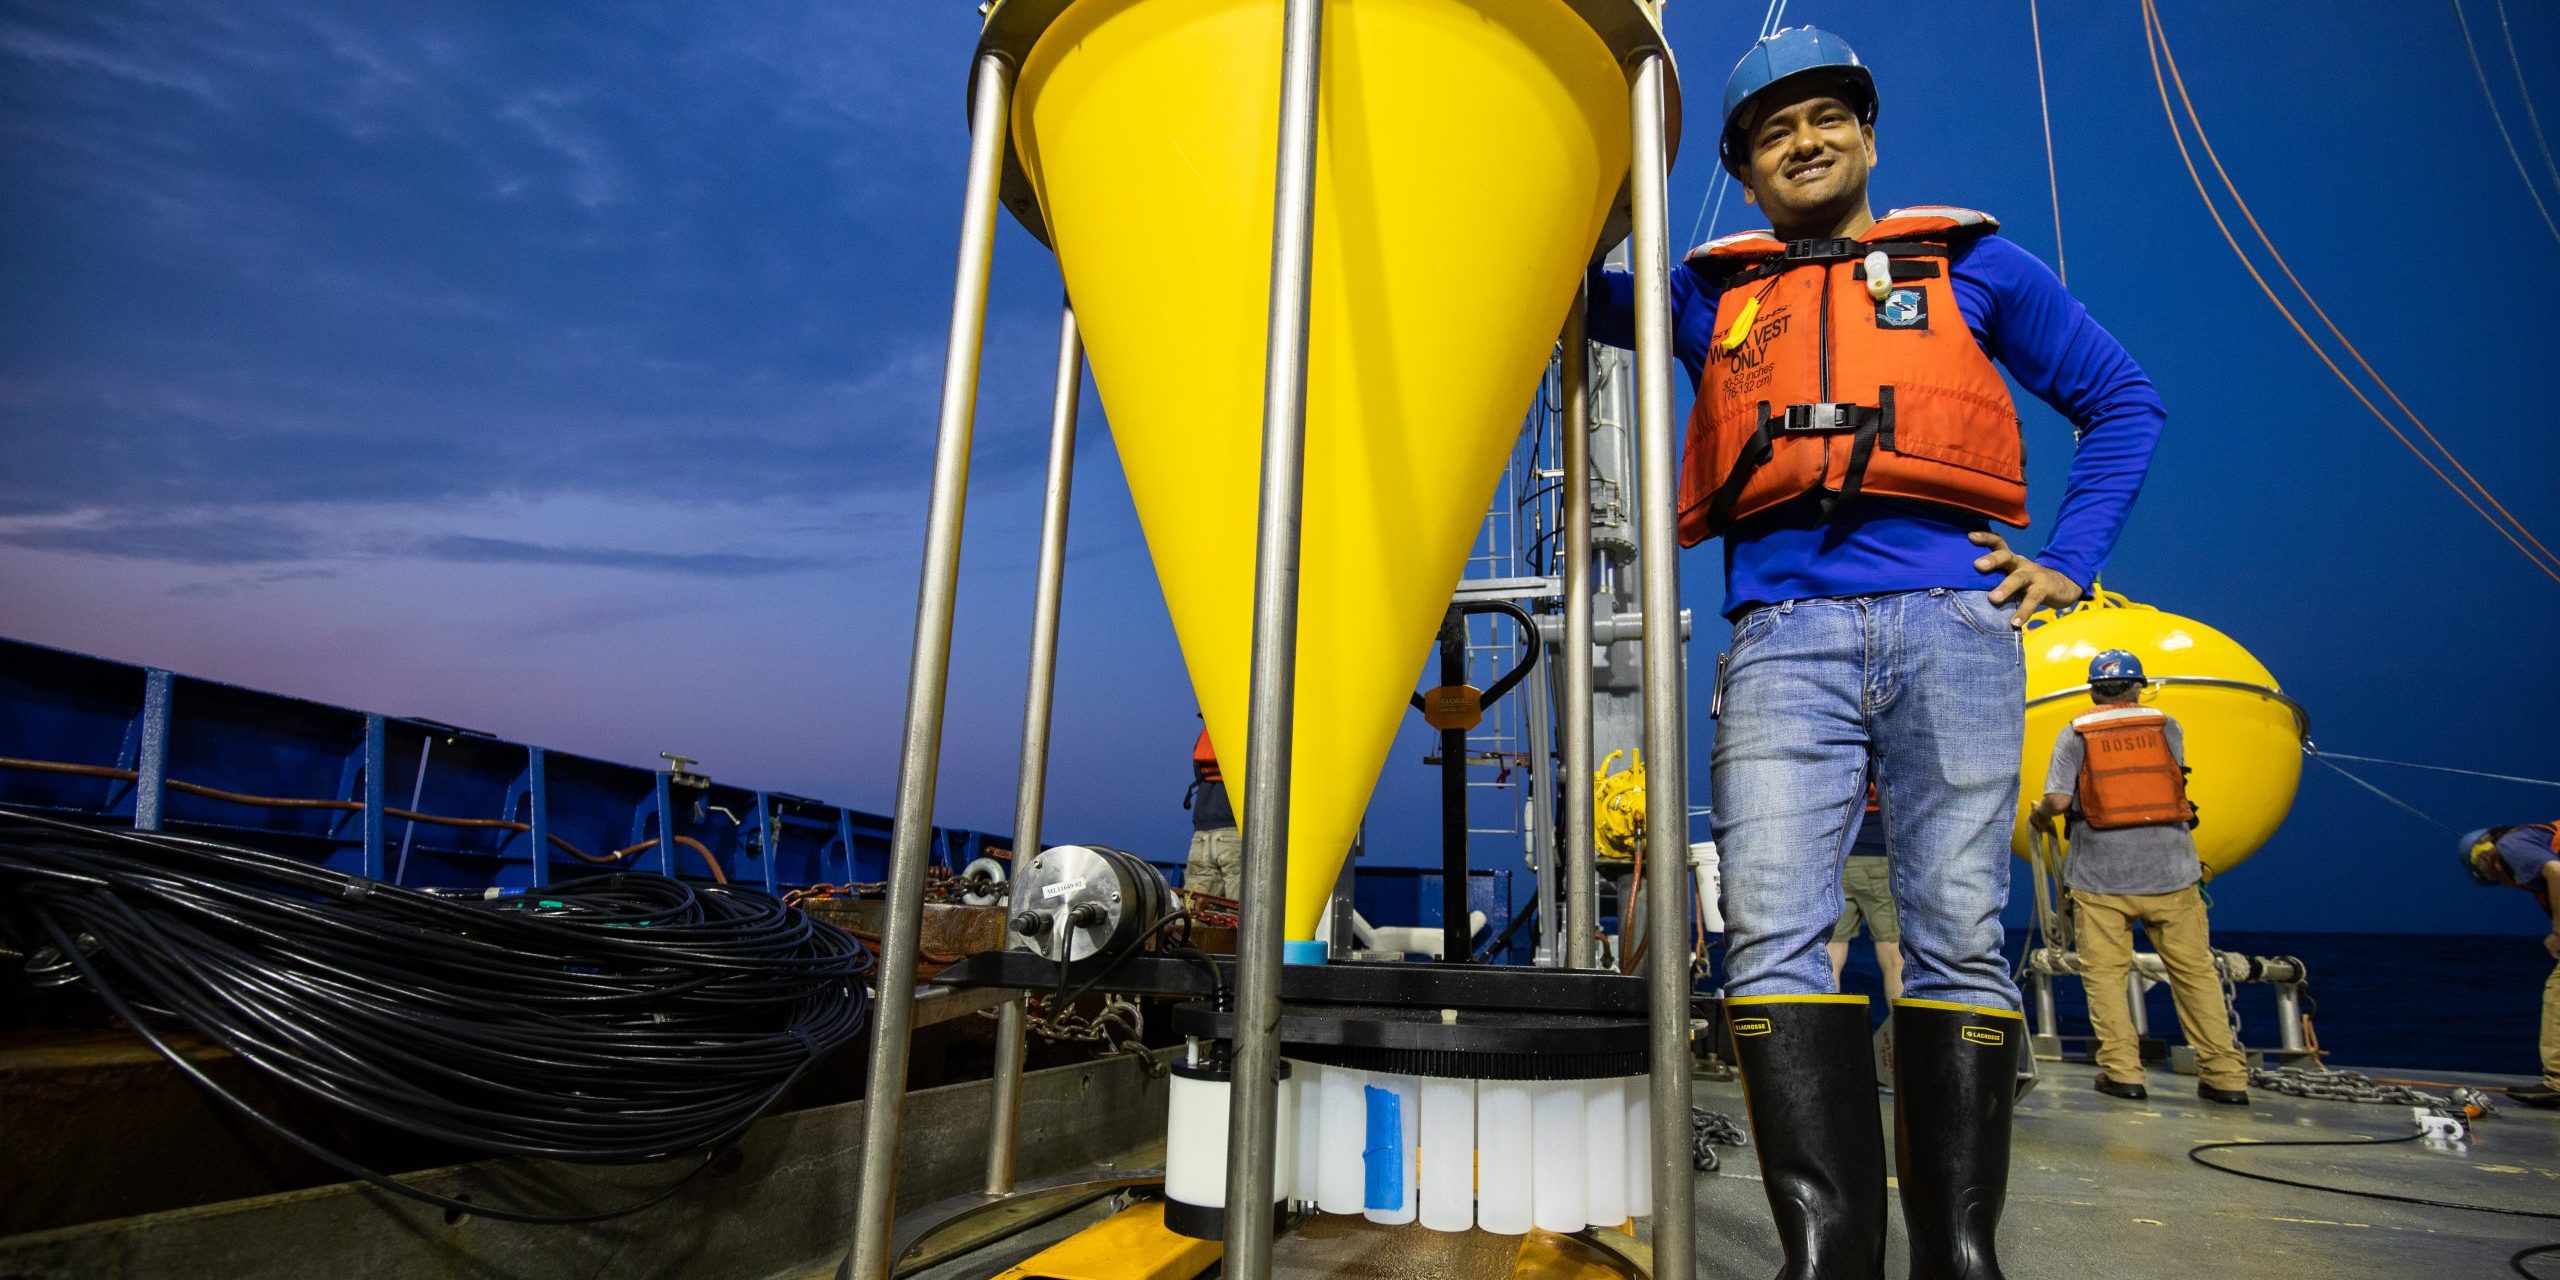 Postdoctoral scholar, Wokil Bam of Café Thorium Lab, stands tall next to a large bottom tethered trap on the stern of R/V Neil Armstrong. The trap will collect falling organic materials in the twilight zone to better understand how this layer helps the ocean sequester atmospheric carbon. Photo by Danny Hentz, © WHOI